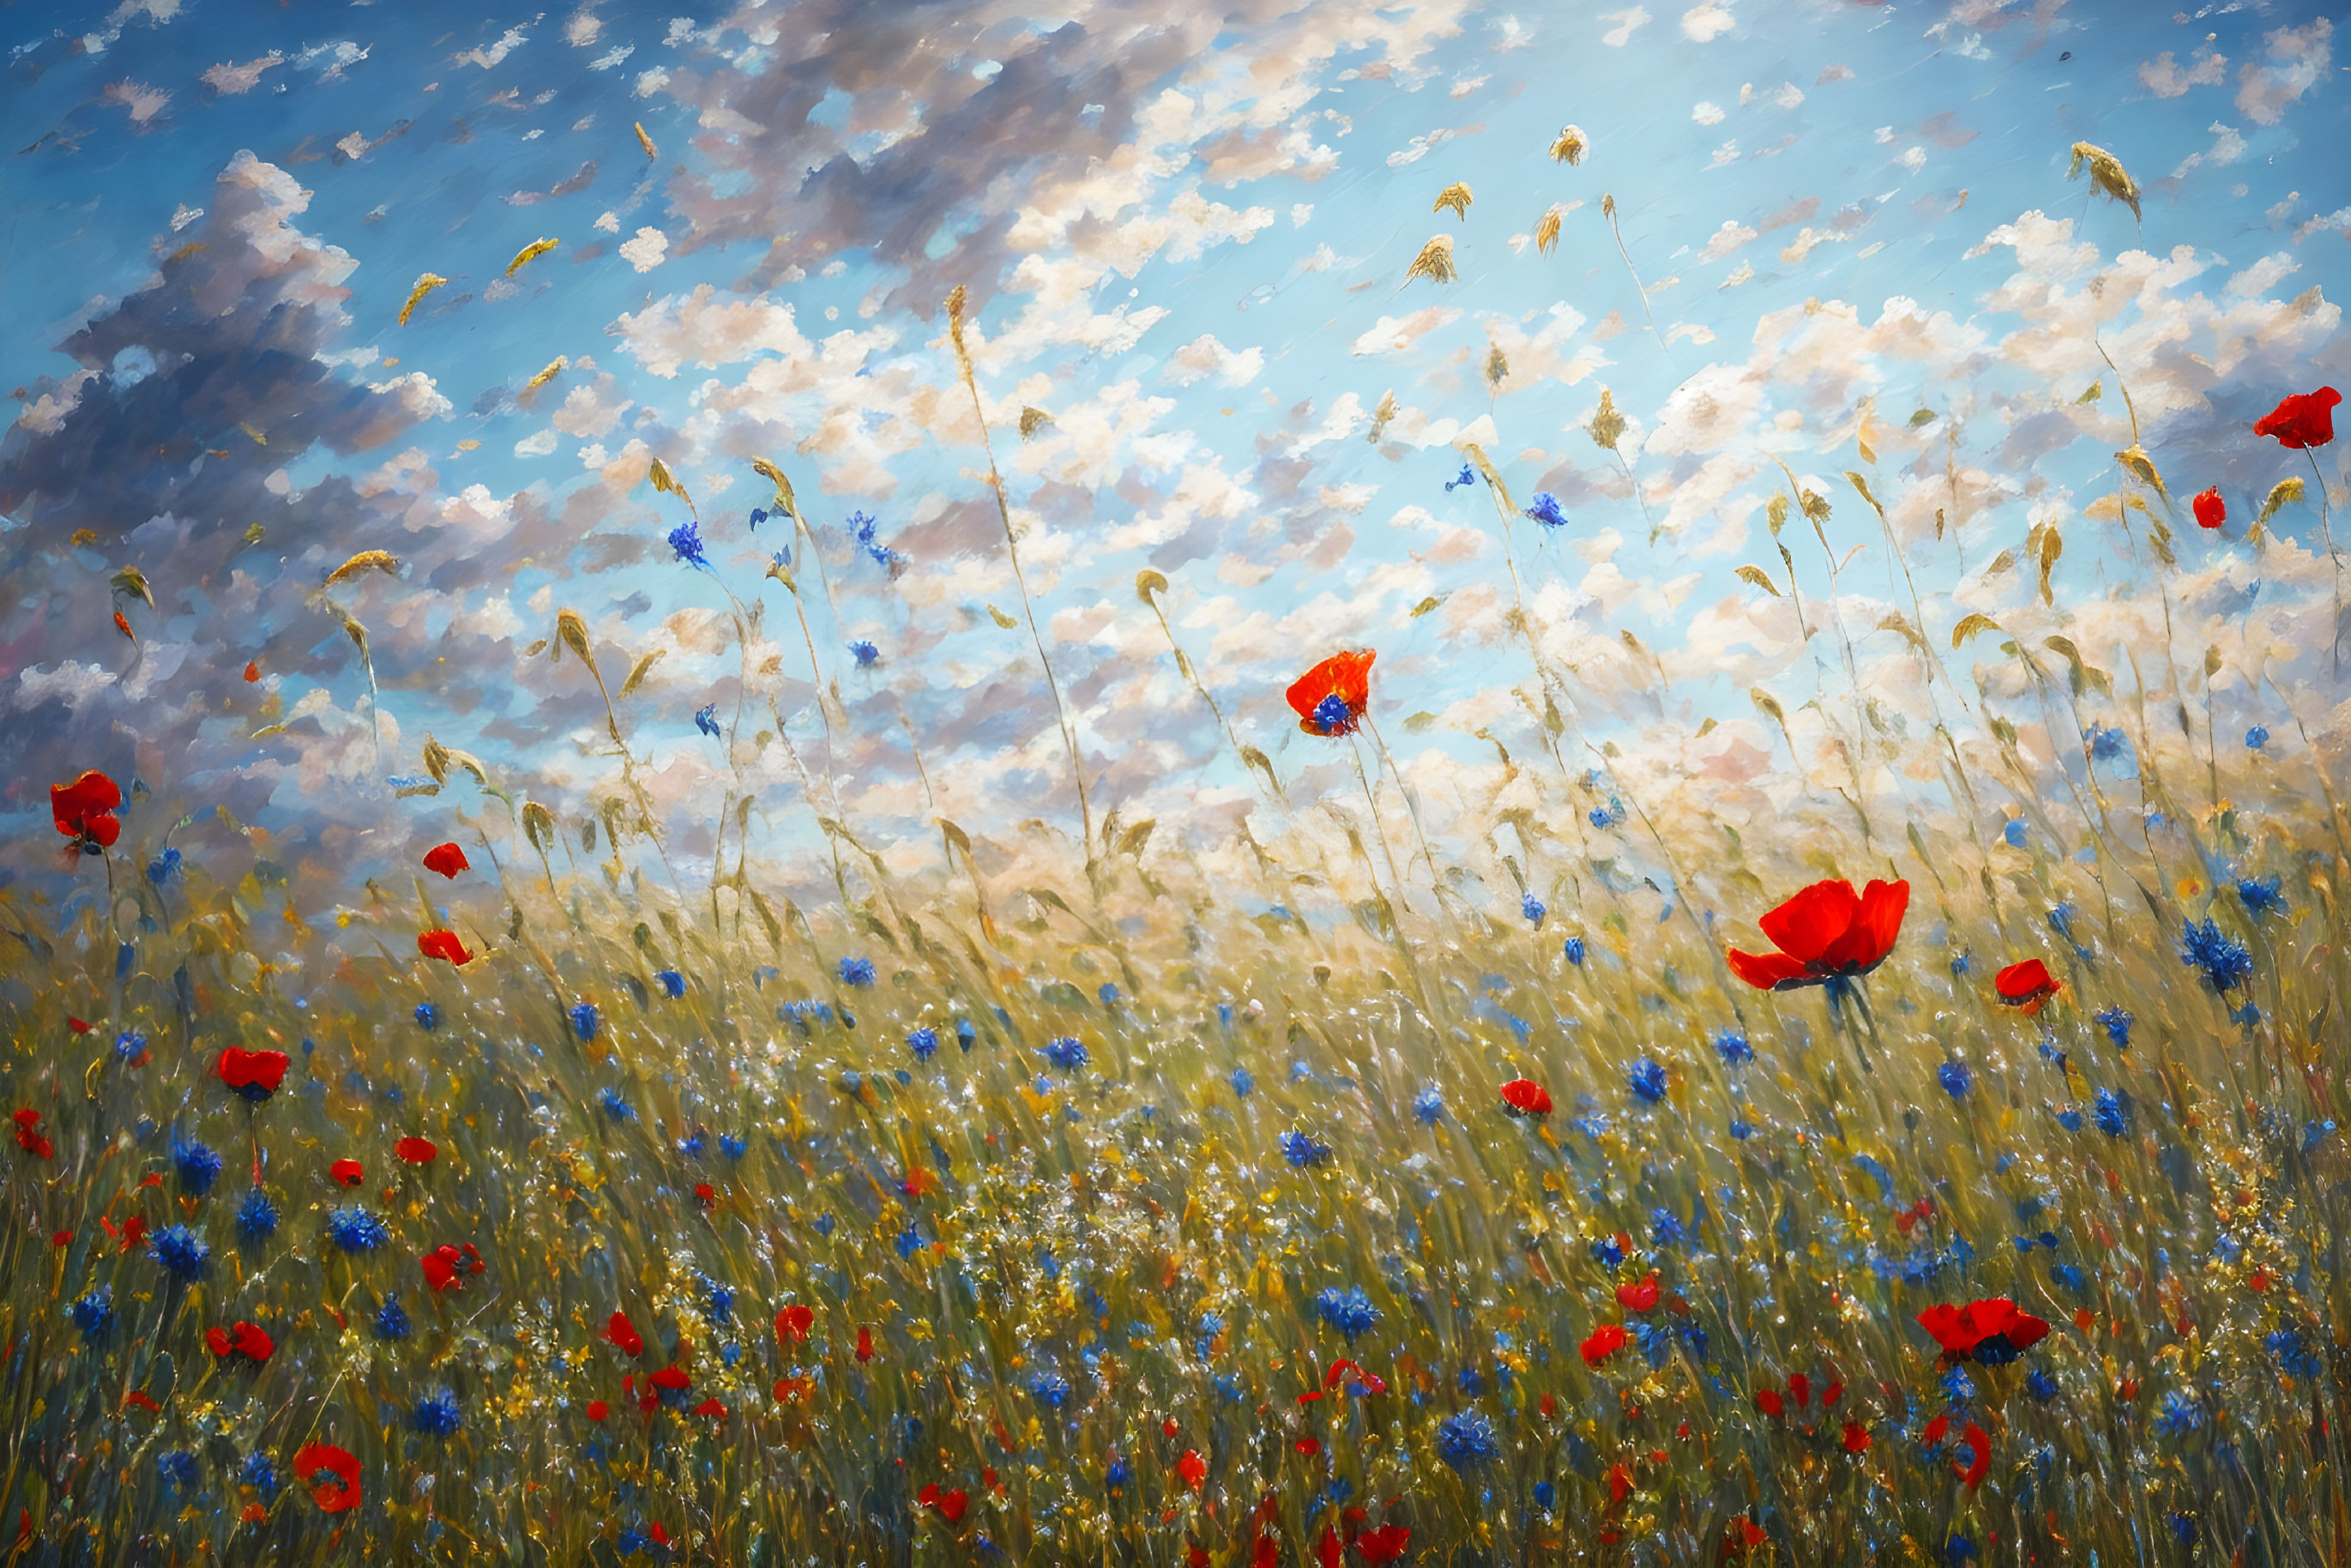 Colorful field painting with tall grass, red and blue wildflowers, and fluffy cloud sky